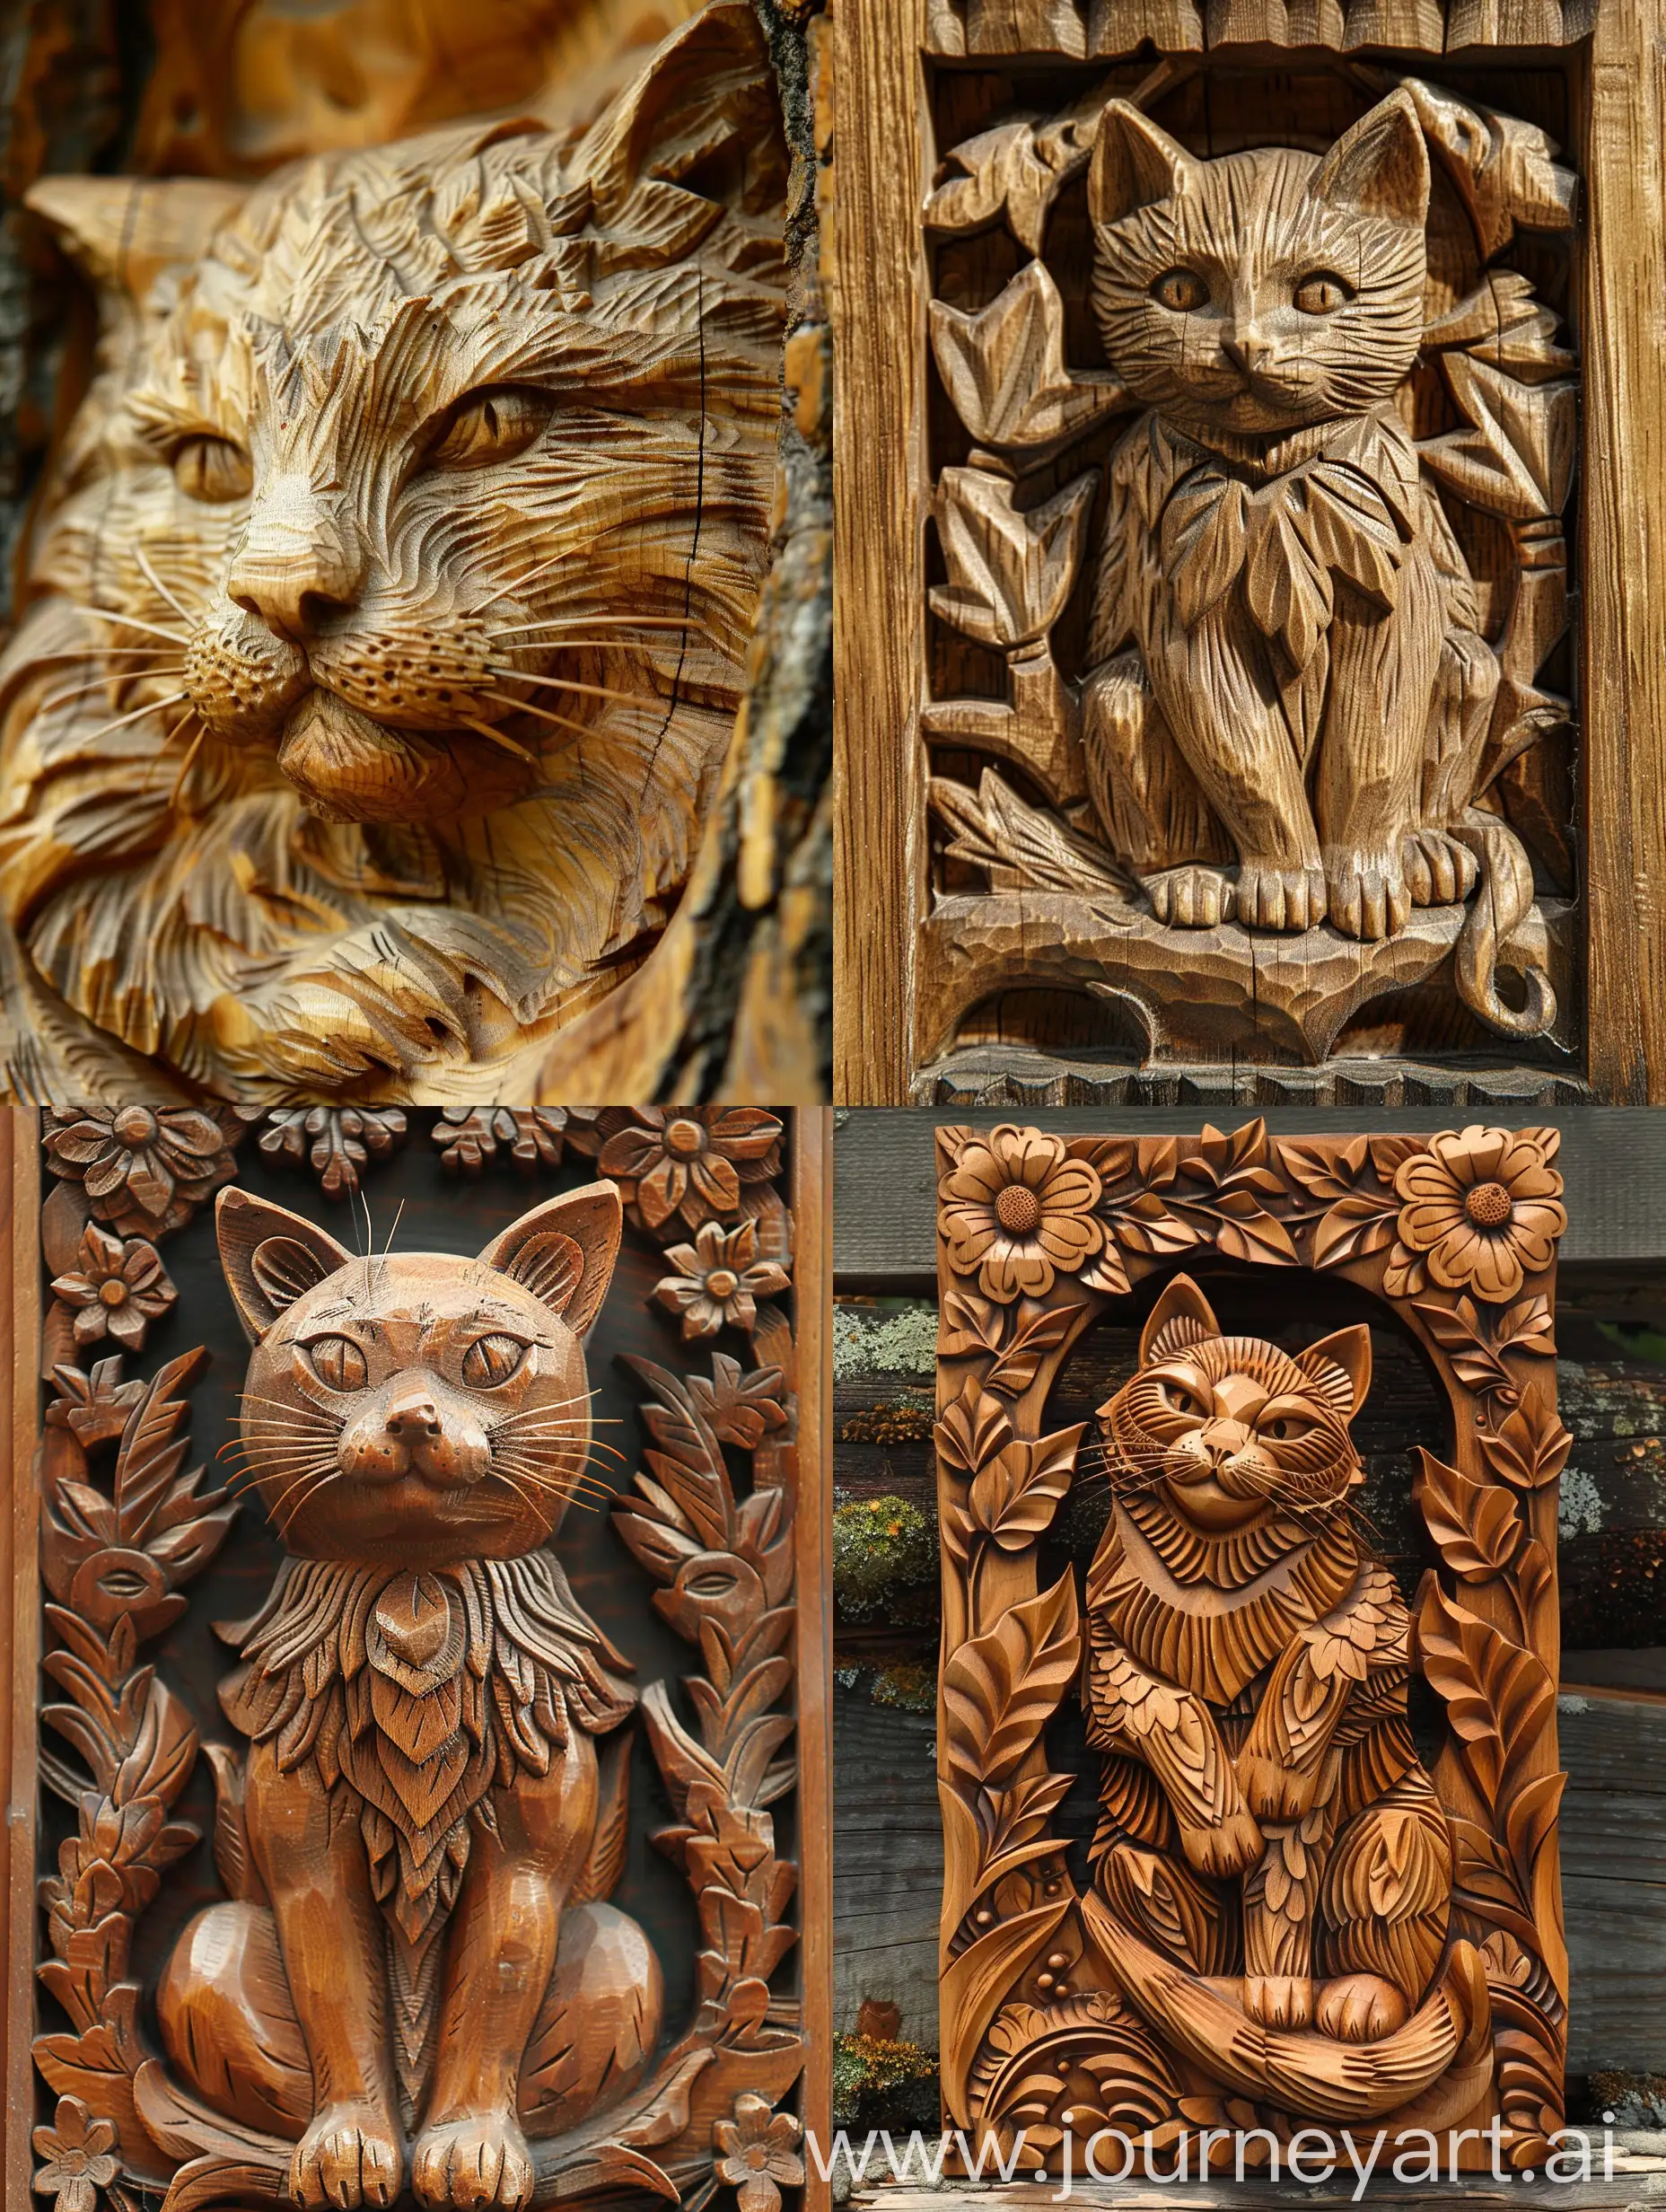 Exquisite-Wood-Carving-of-a-Plump-Cat